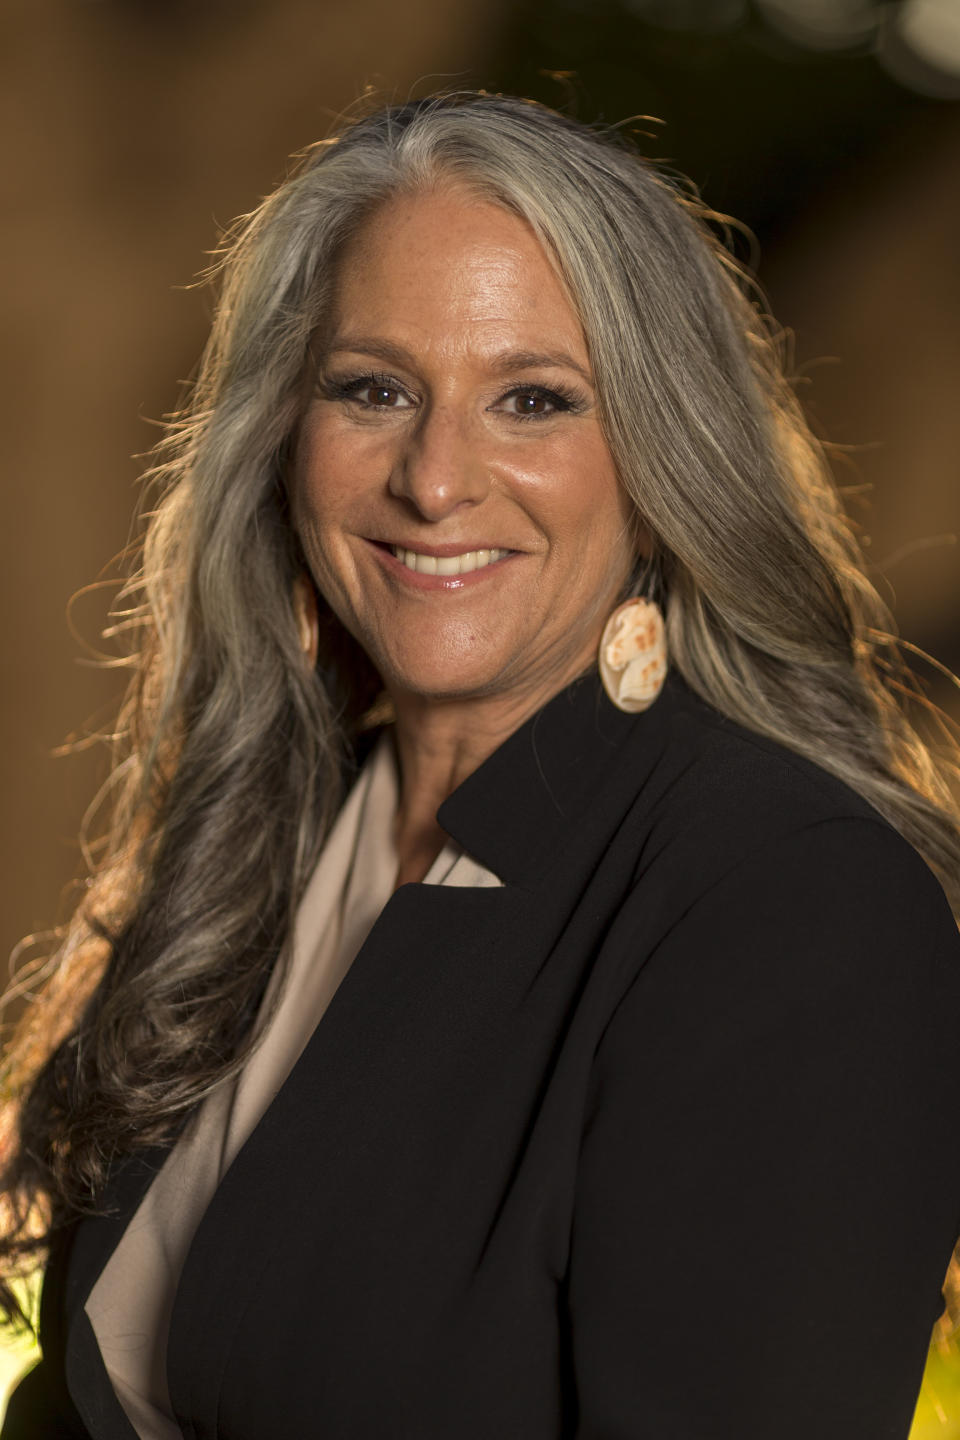 This 2013 photo provided by Okay Goodnight shows Marta Kauffman. Kauffman, the creator of TV’s “Friends” says there are no plans for a reunion and there won’t be any. She said she wouldn’t want to “mess up a good thing” for fans with a potentially disappointing reunion. Kauffman and David Crane created and produced “Friends,” NBC’s hit sitcom that aired from 1994 to 2004. Kauffman’s current projects include the Netflix series “Grace and Frankie.” (Okay Goodnight via AP)